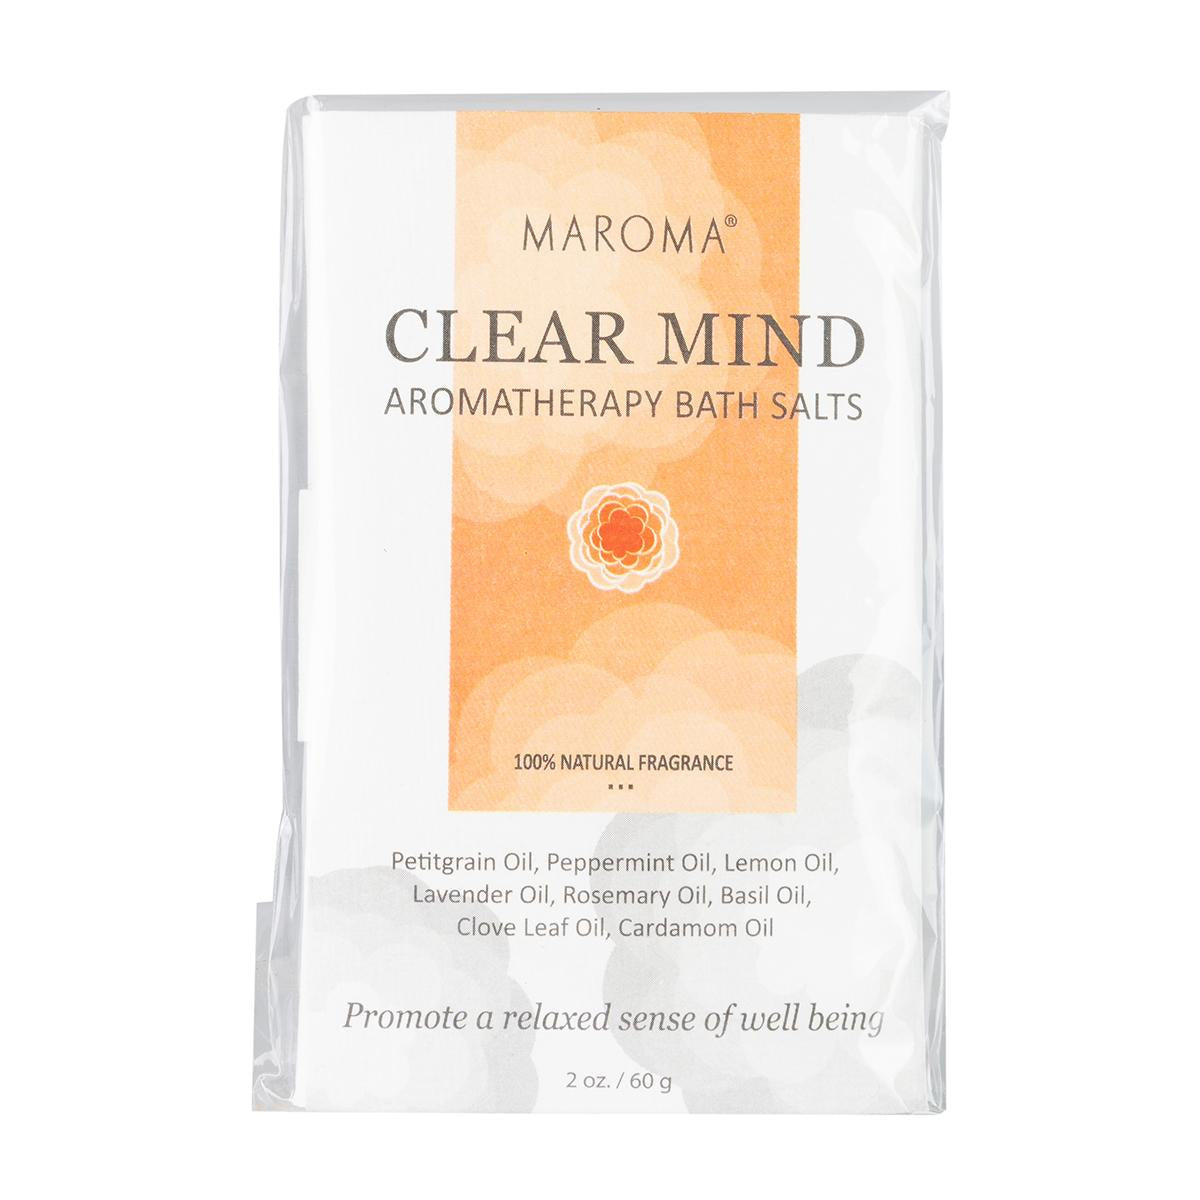 Primary image of Clear Mind Aromatherapy Bath Salts